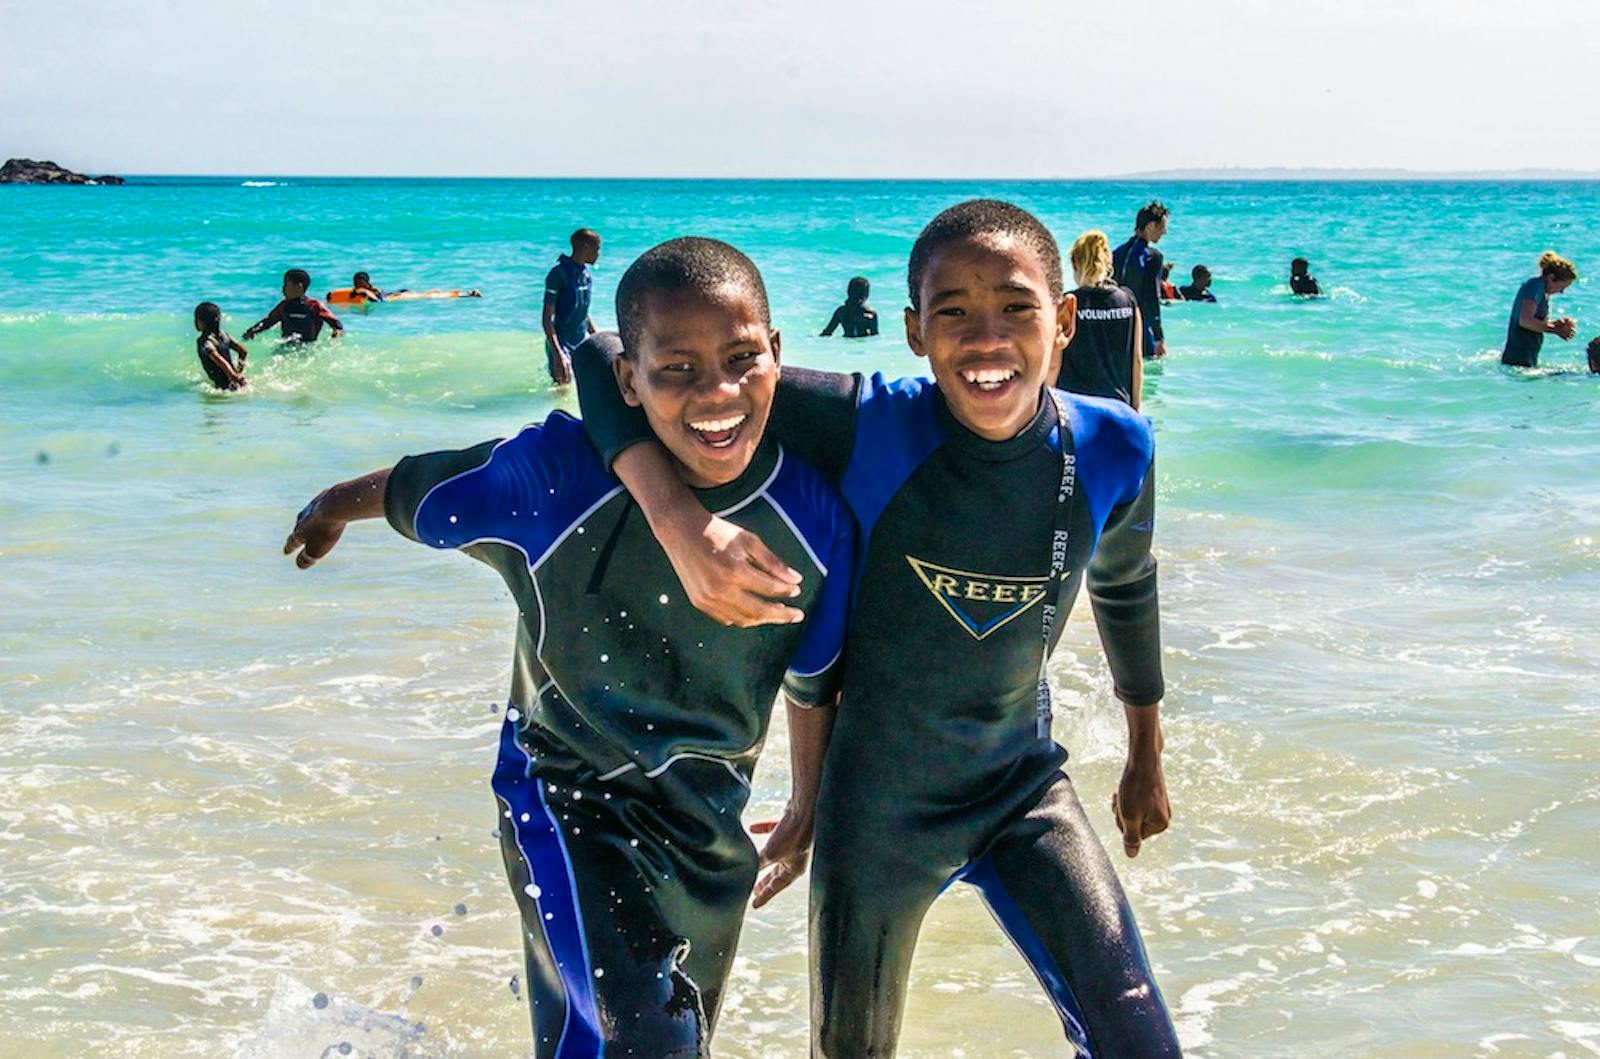 Swimming & Surfing Instructor | Volunteer in South Africa 2023